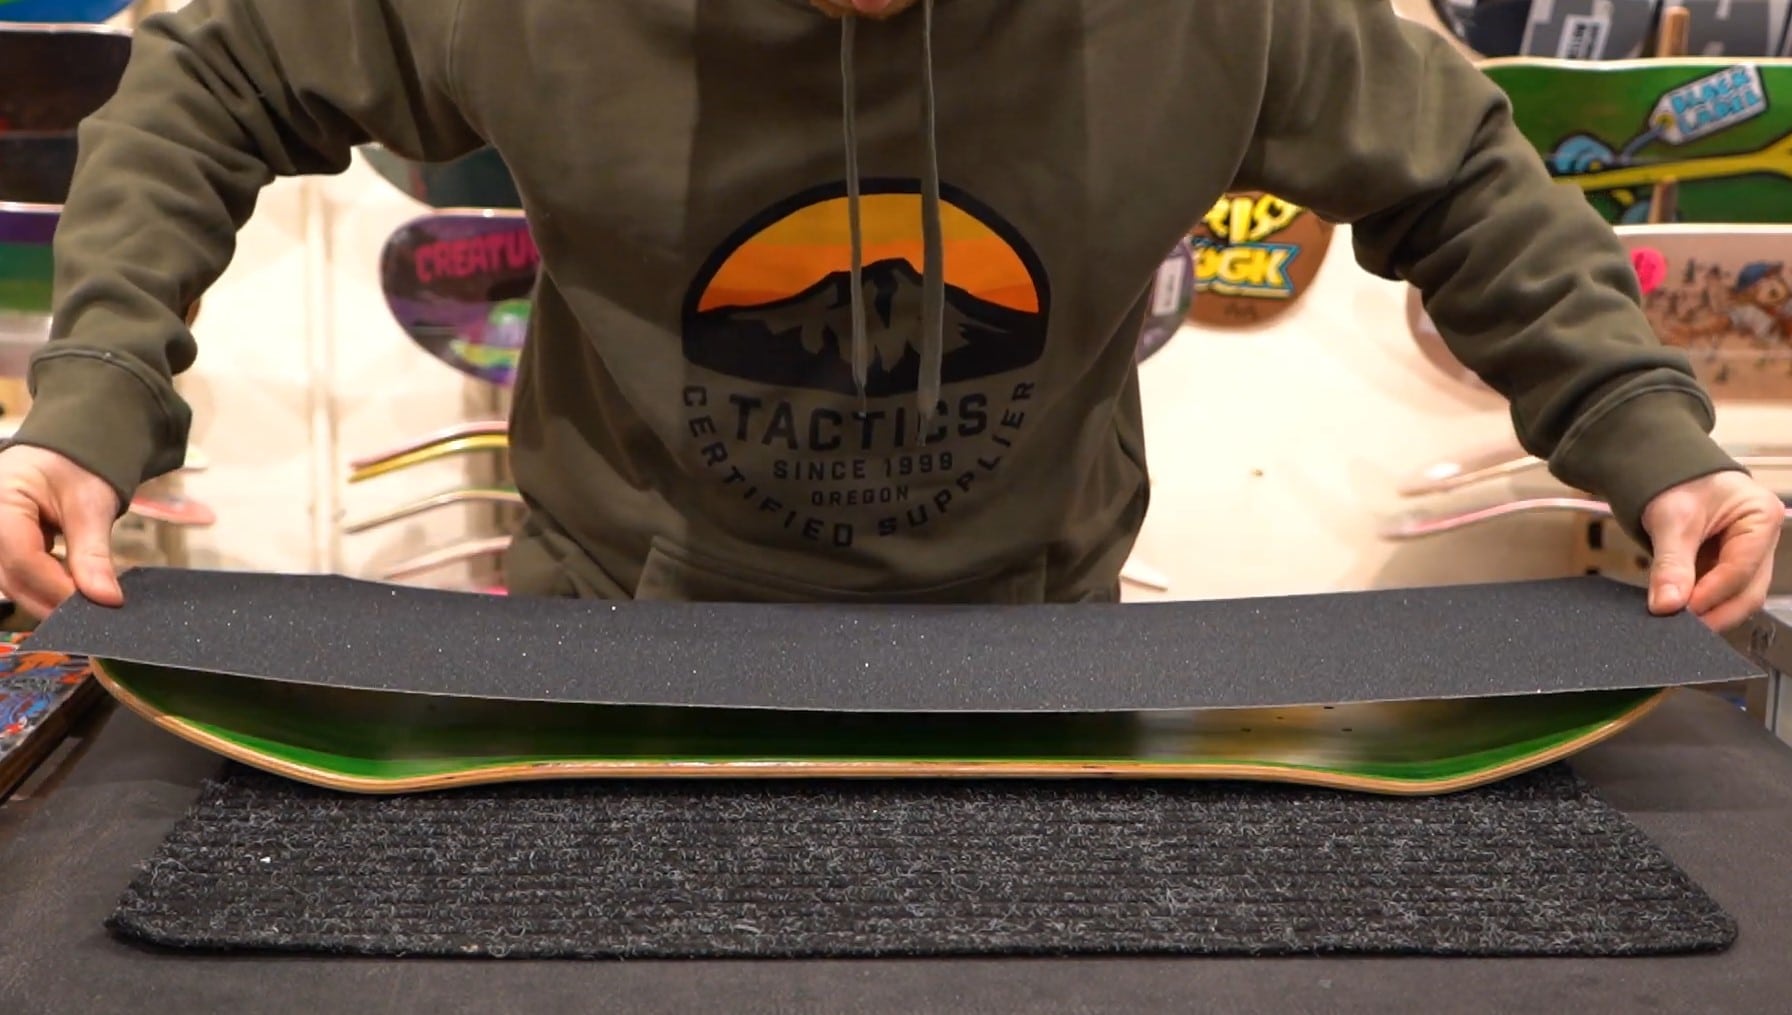 How to Grip a Skateboard: A Step-by-Step Instructive Guide